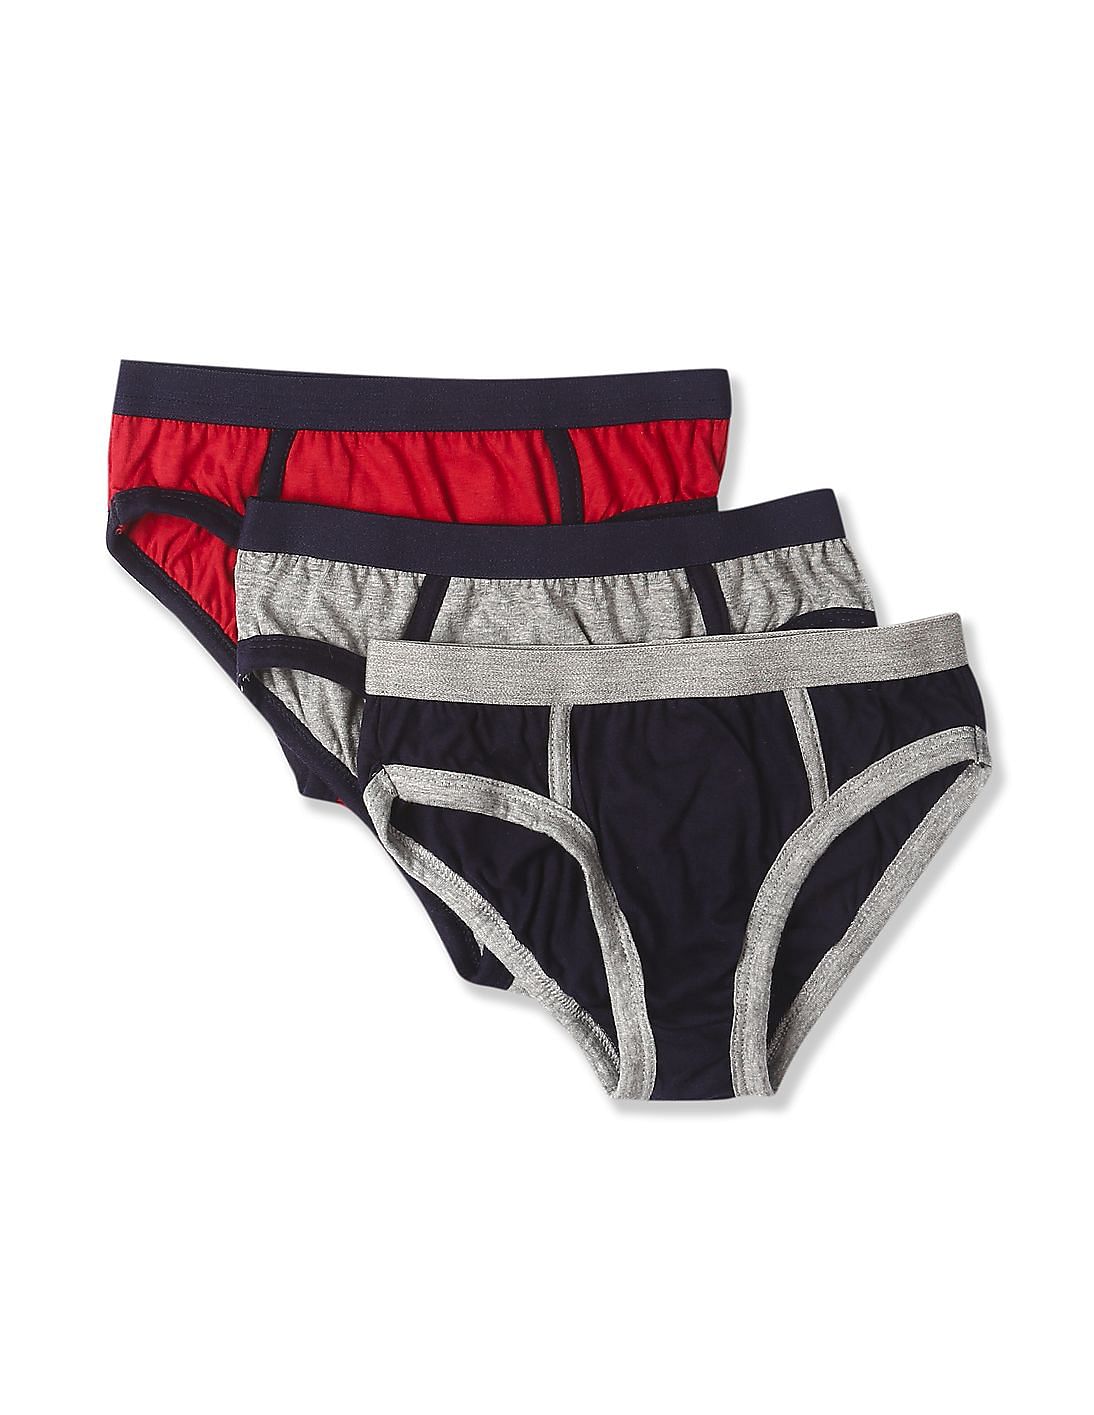 Buy Boys Assorted Boys Solid Briefs - Pack Of 3 online at NNNOW.com